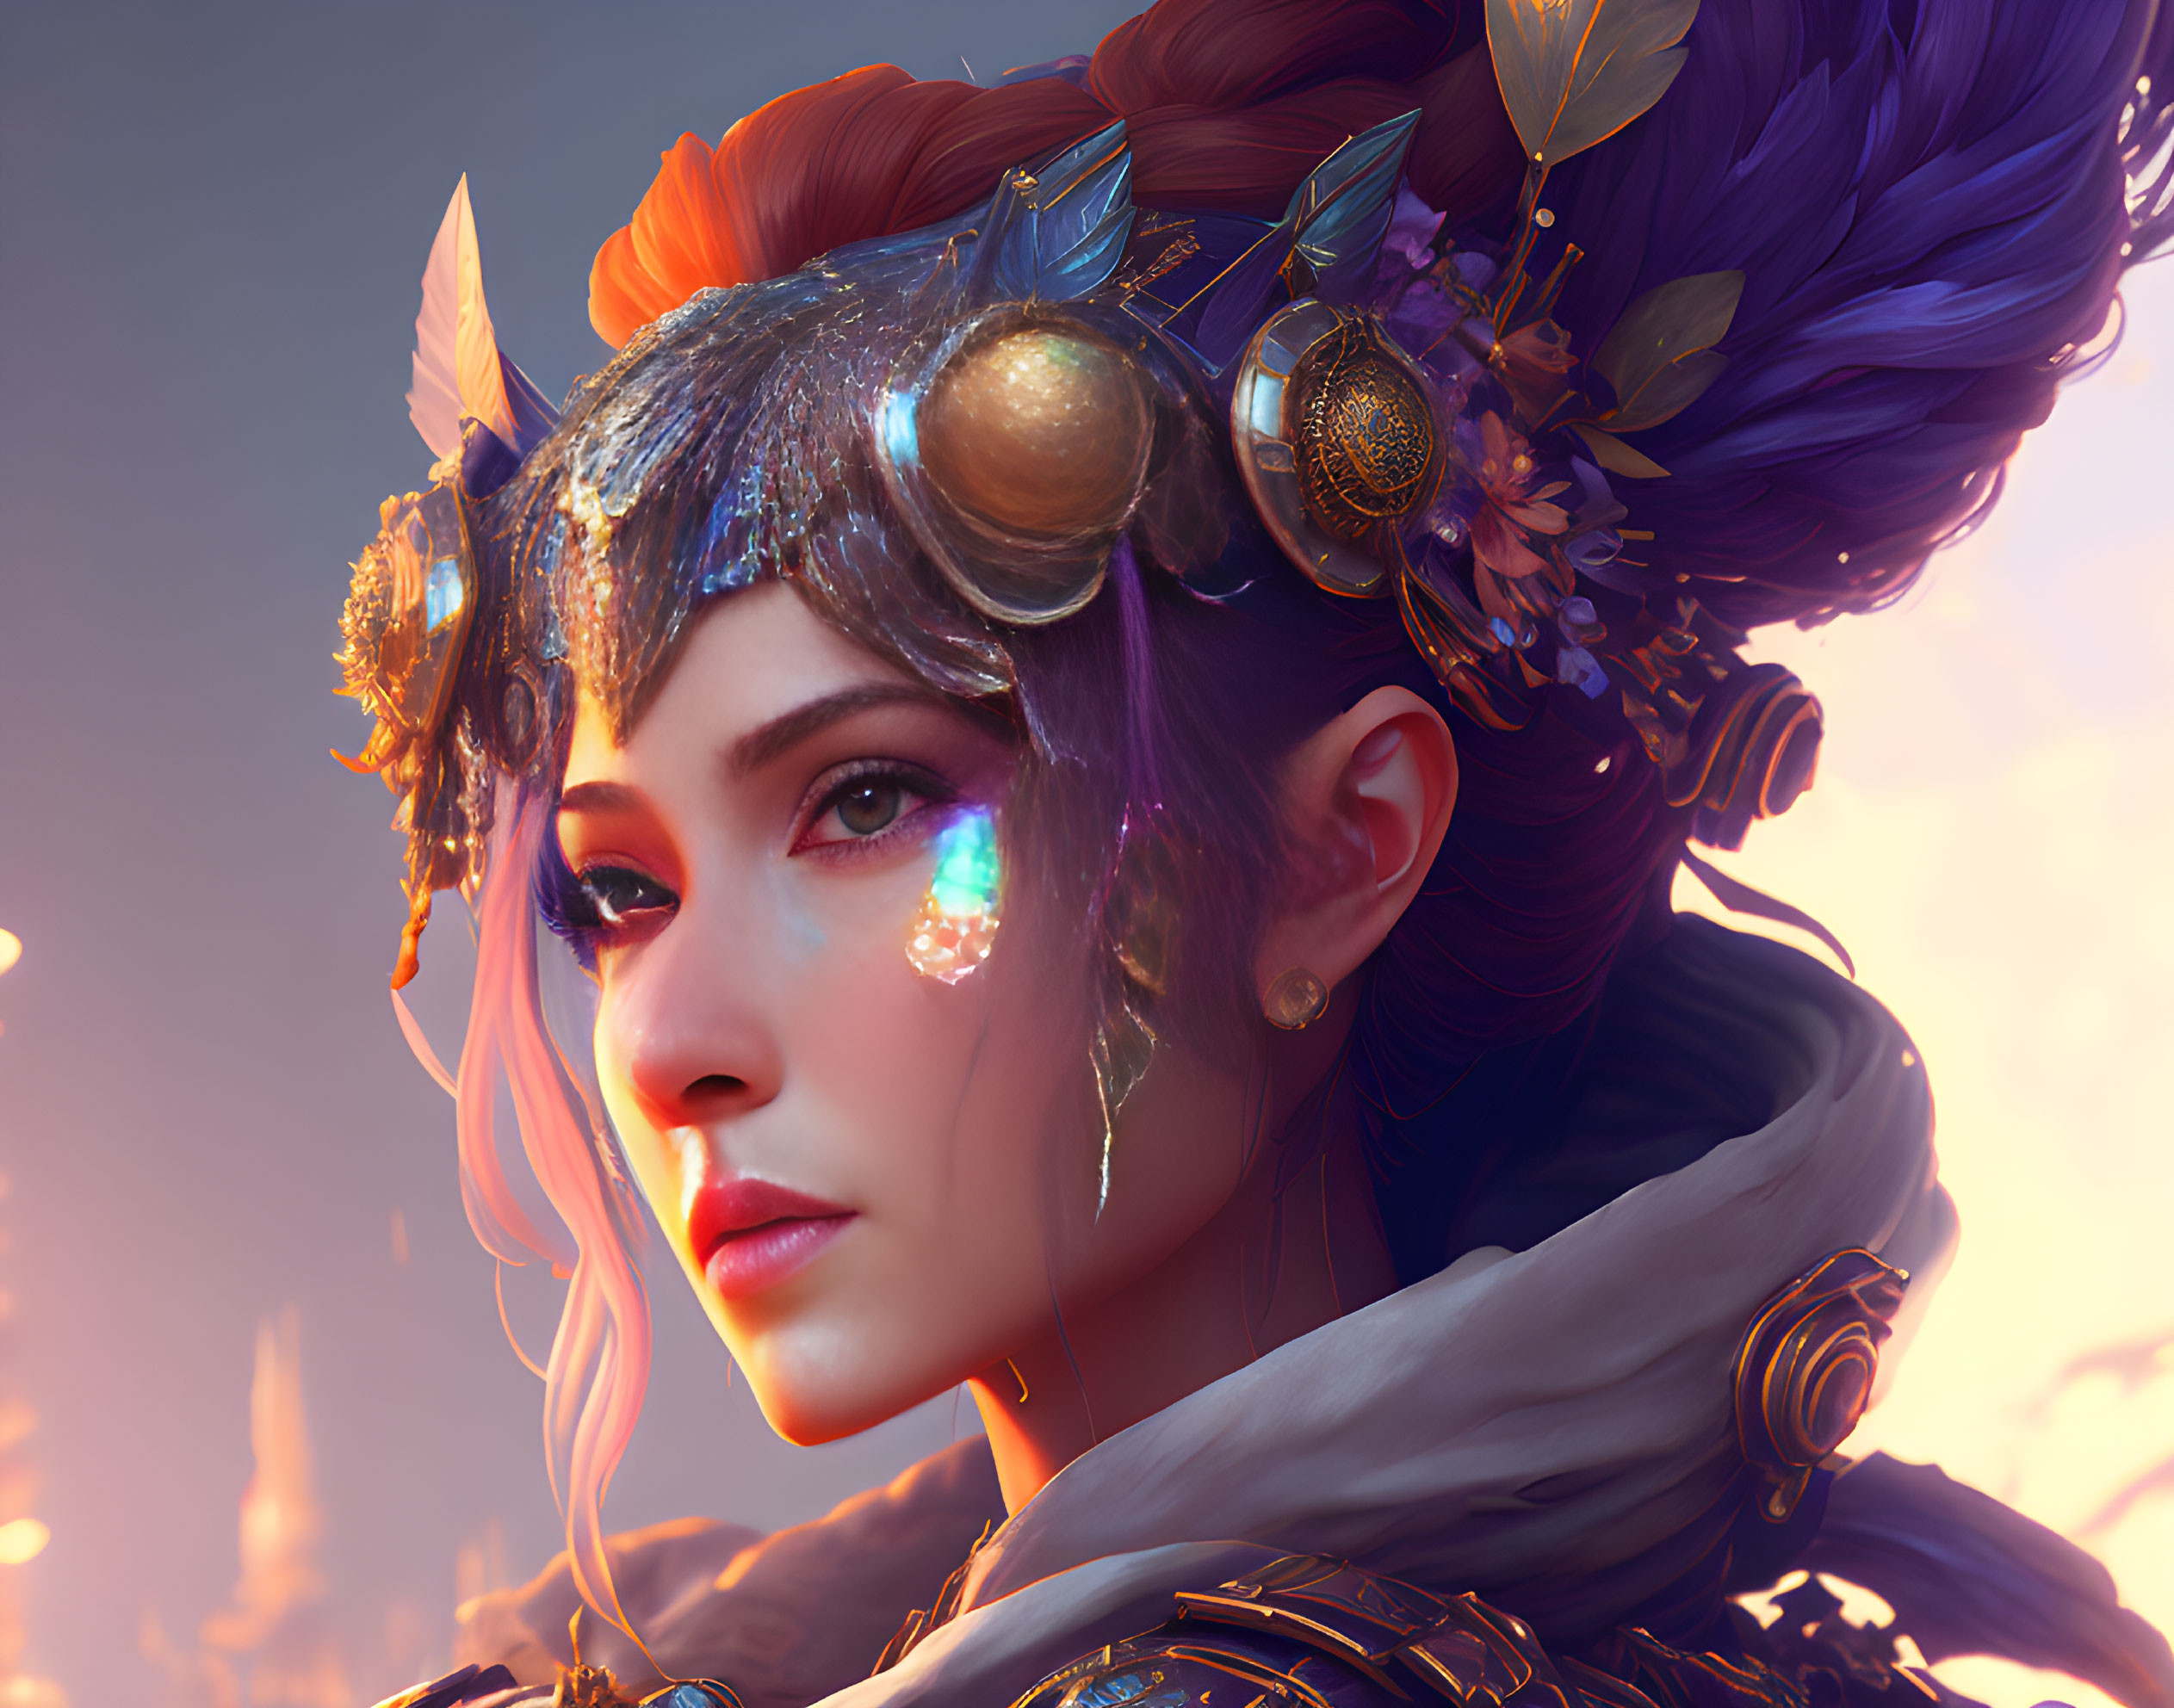 Vibrant fantasy-inspired woman portrait with intricate makeup and headdress